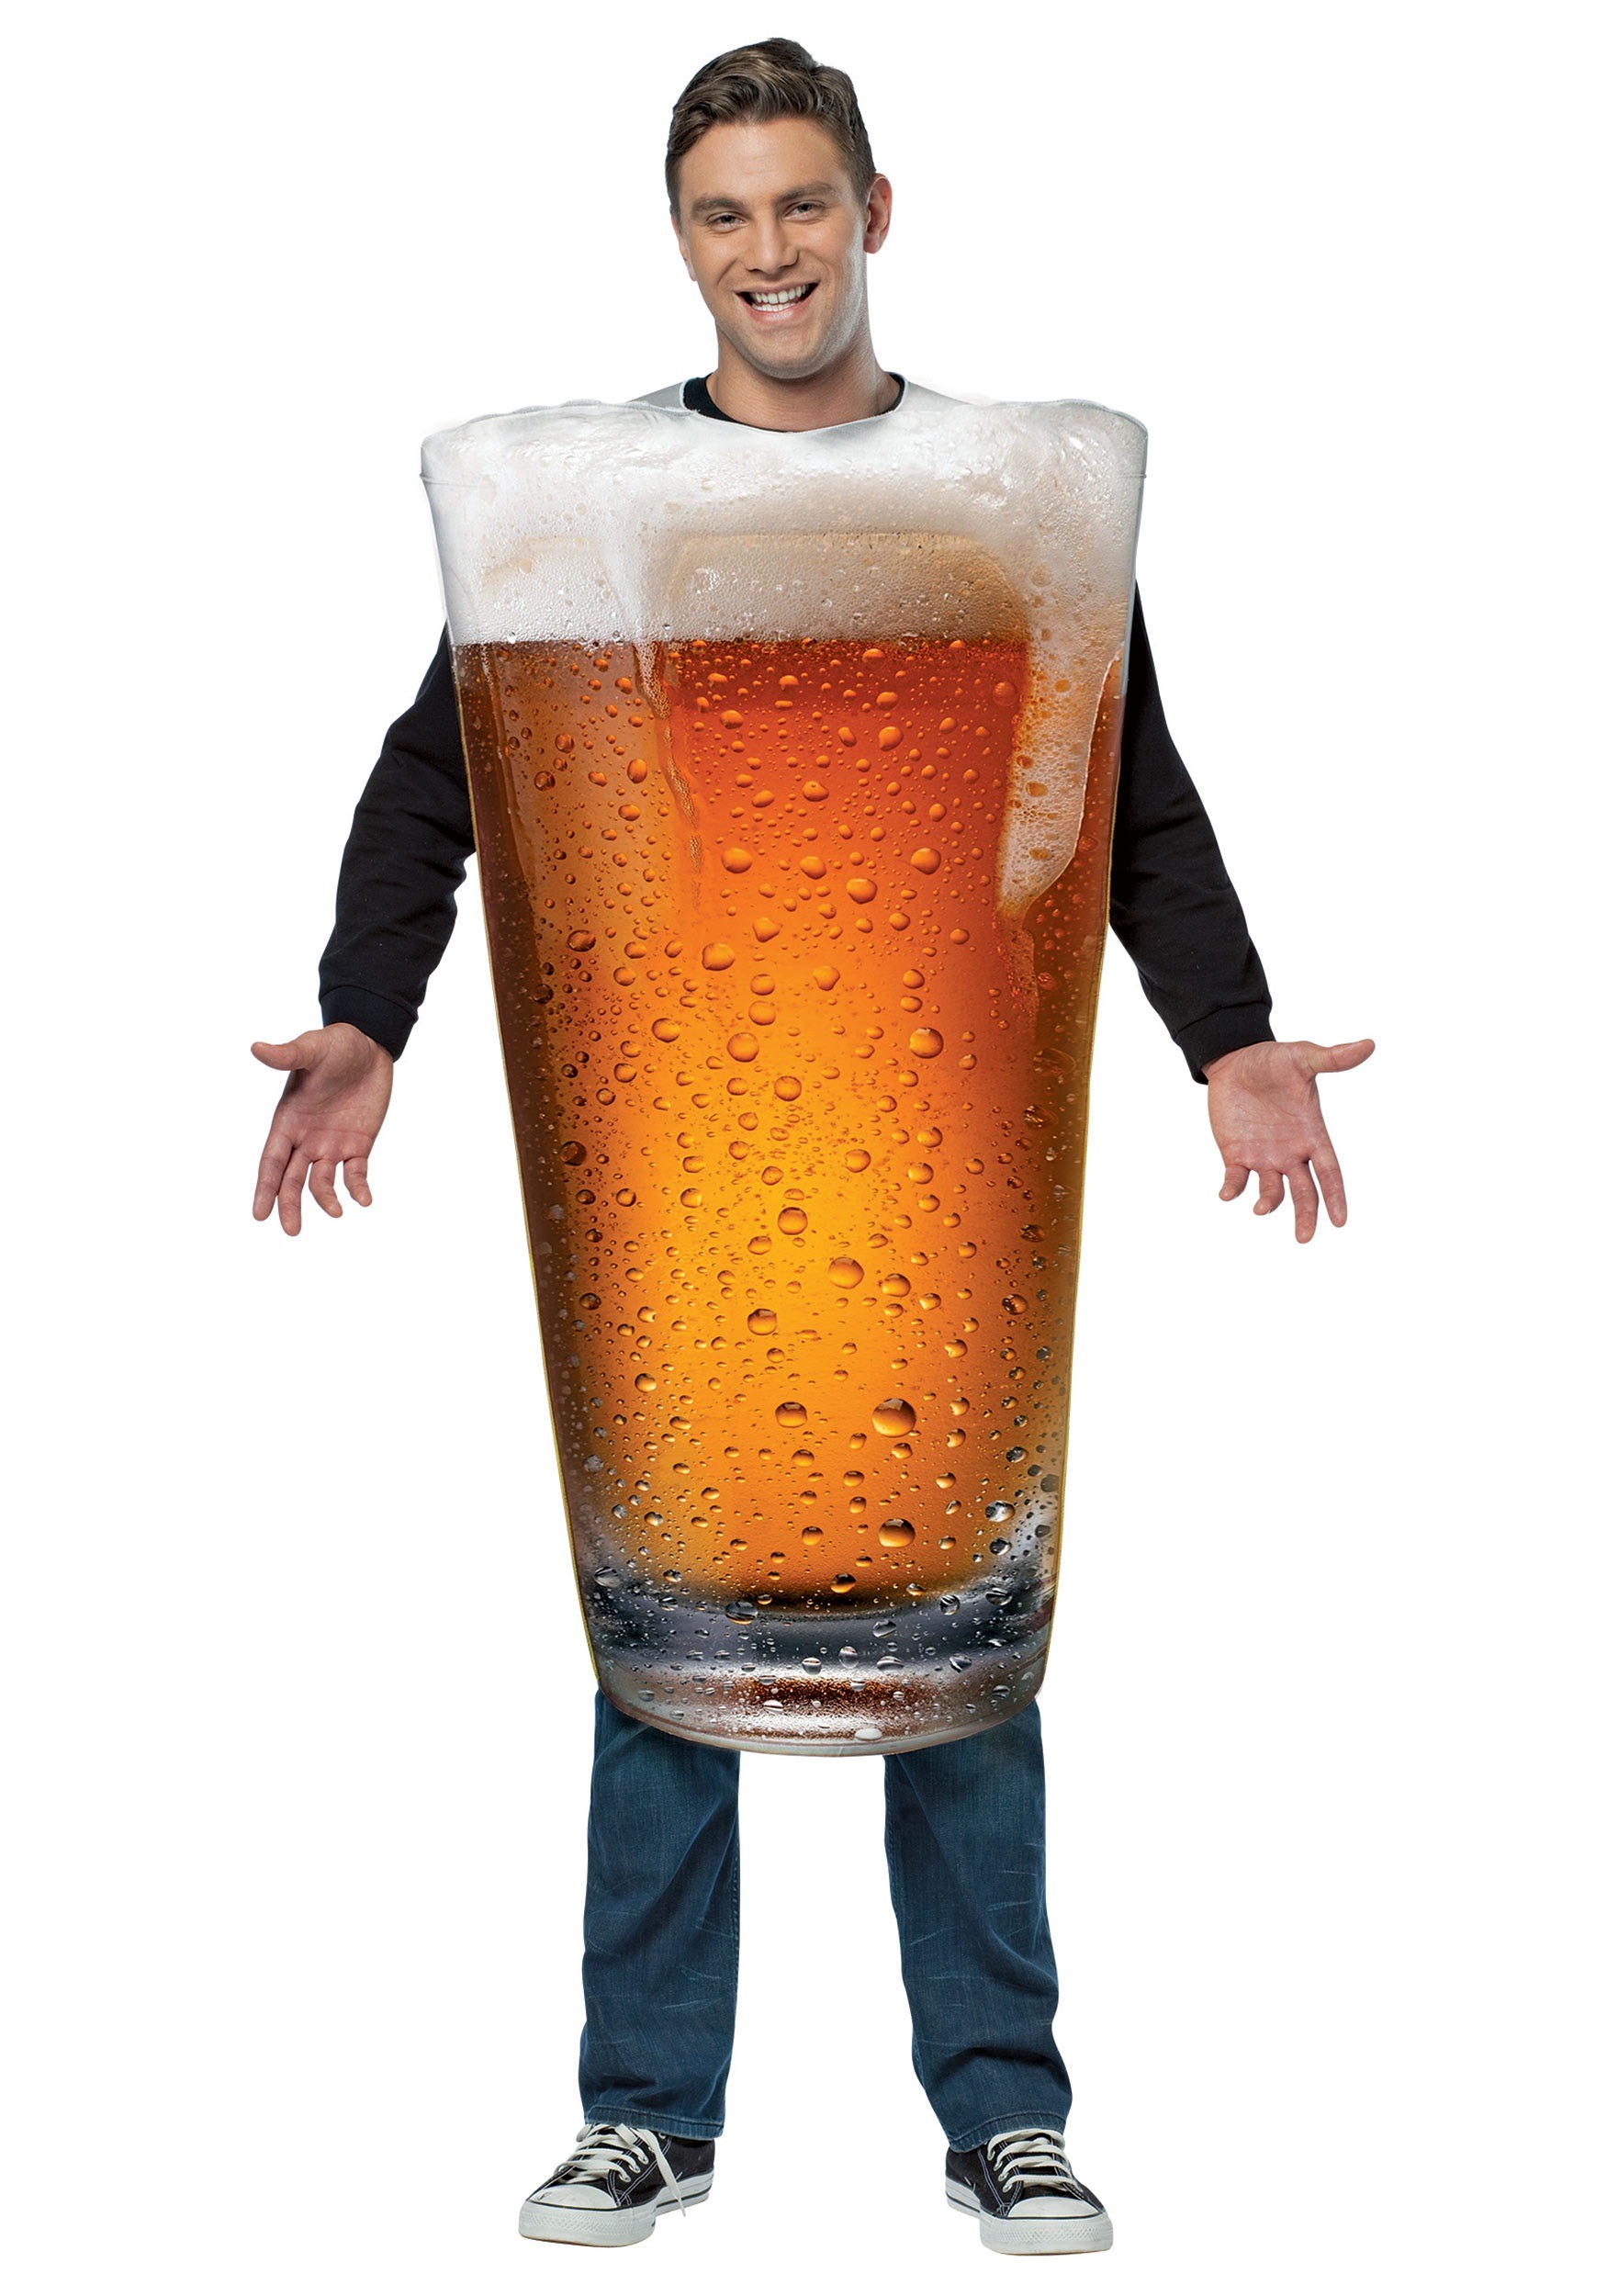 https://images.halloweencostumes.com/products/39977/1-1/adult-pint-of-beer-costume.jpg